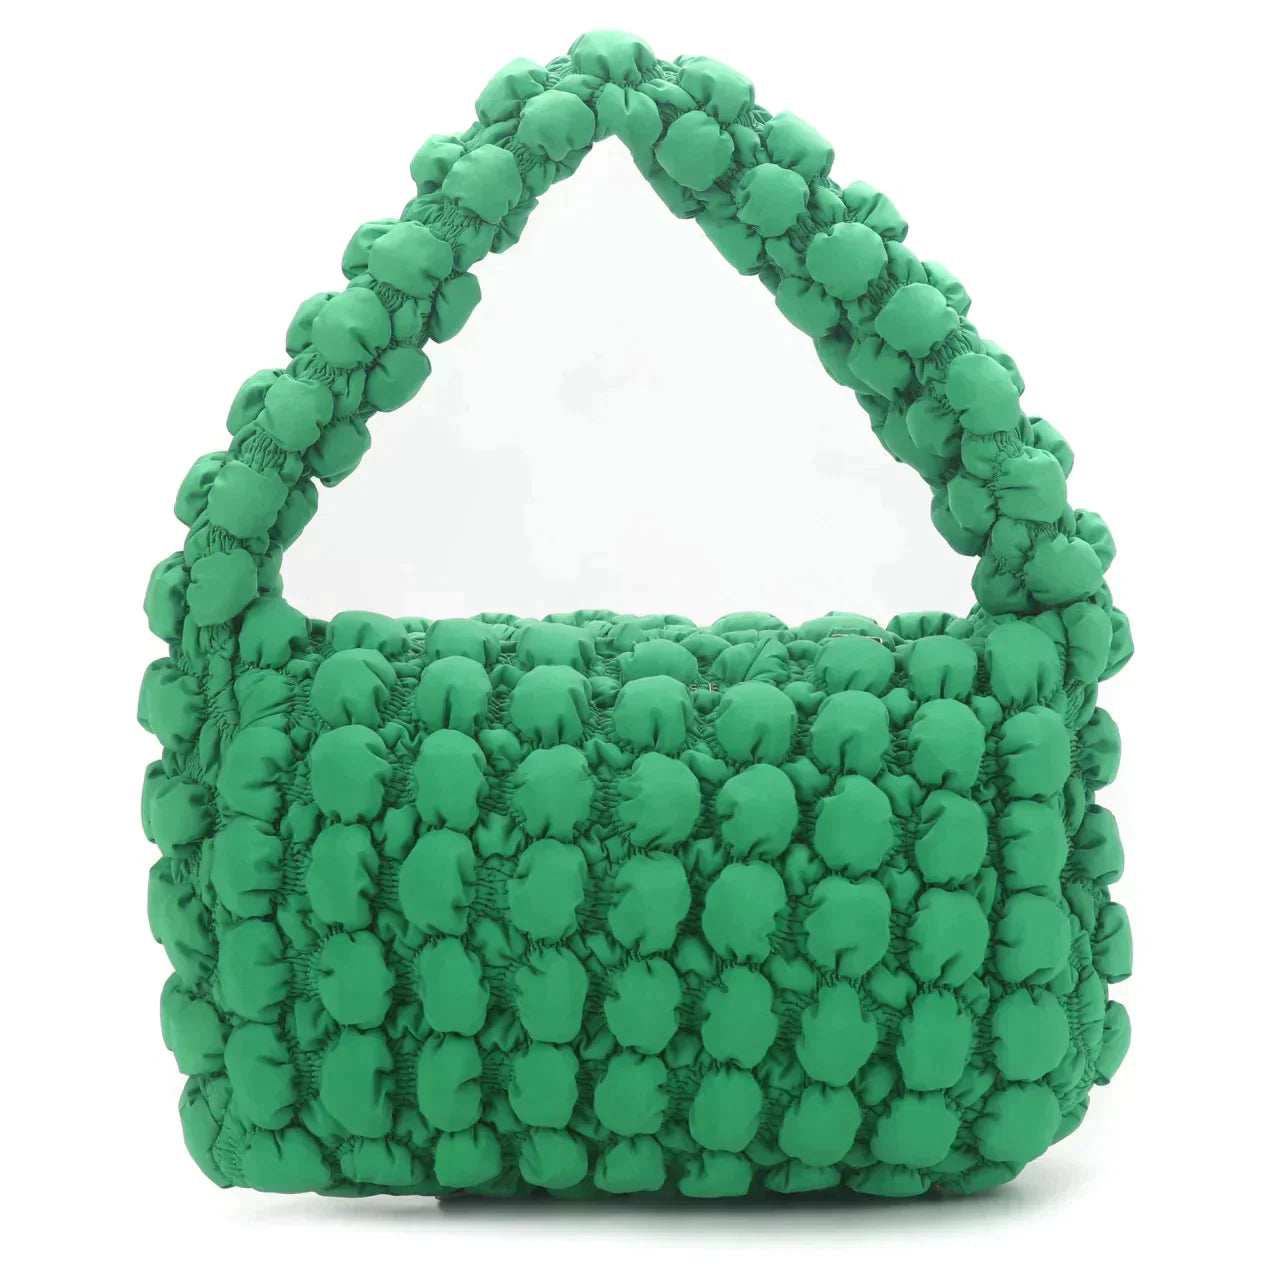 THE RECYCLED LEILA QUILTED SHOULDER BAG - GREEN - EXCLUSIVE Bags from SILFEN - Just €72! SHOP NOW AT IAMINHATELOVE BOTH IN STORE FOR CYPRUS AND ONLINE WORLDWIDE @ IAMINHATELOVE.COM